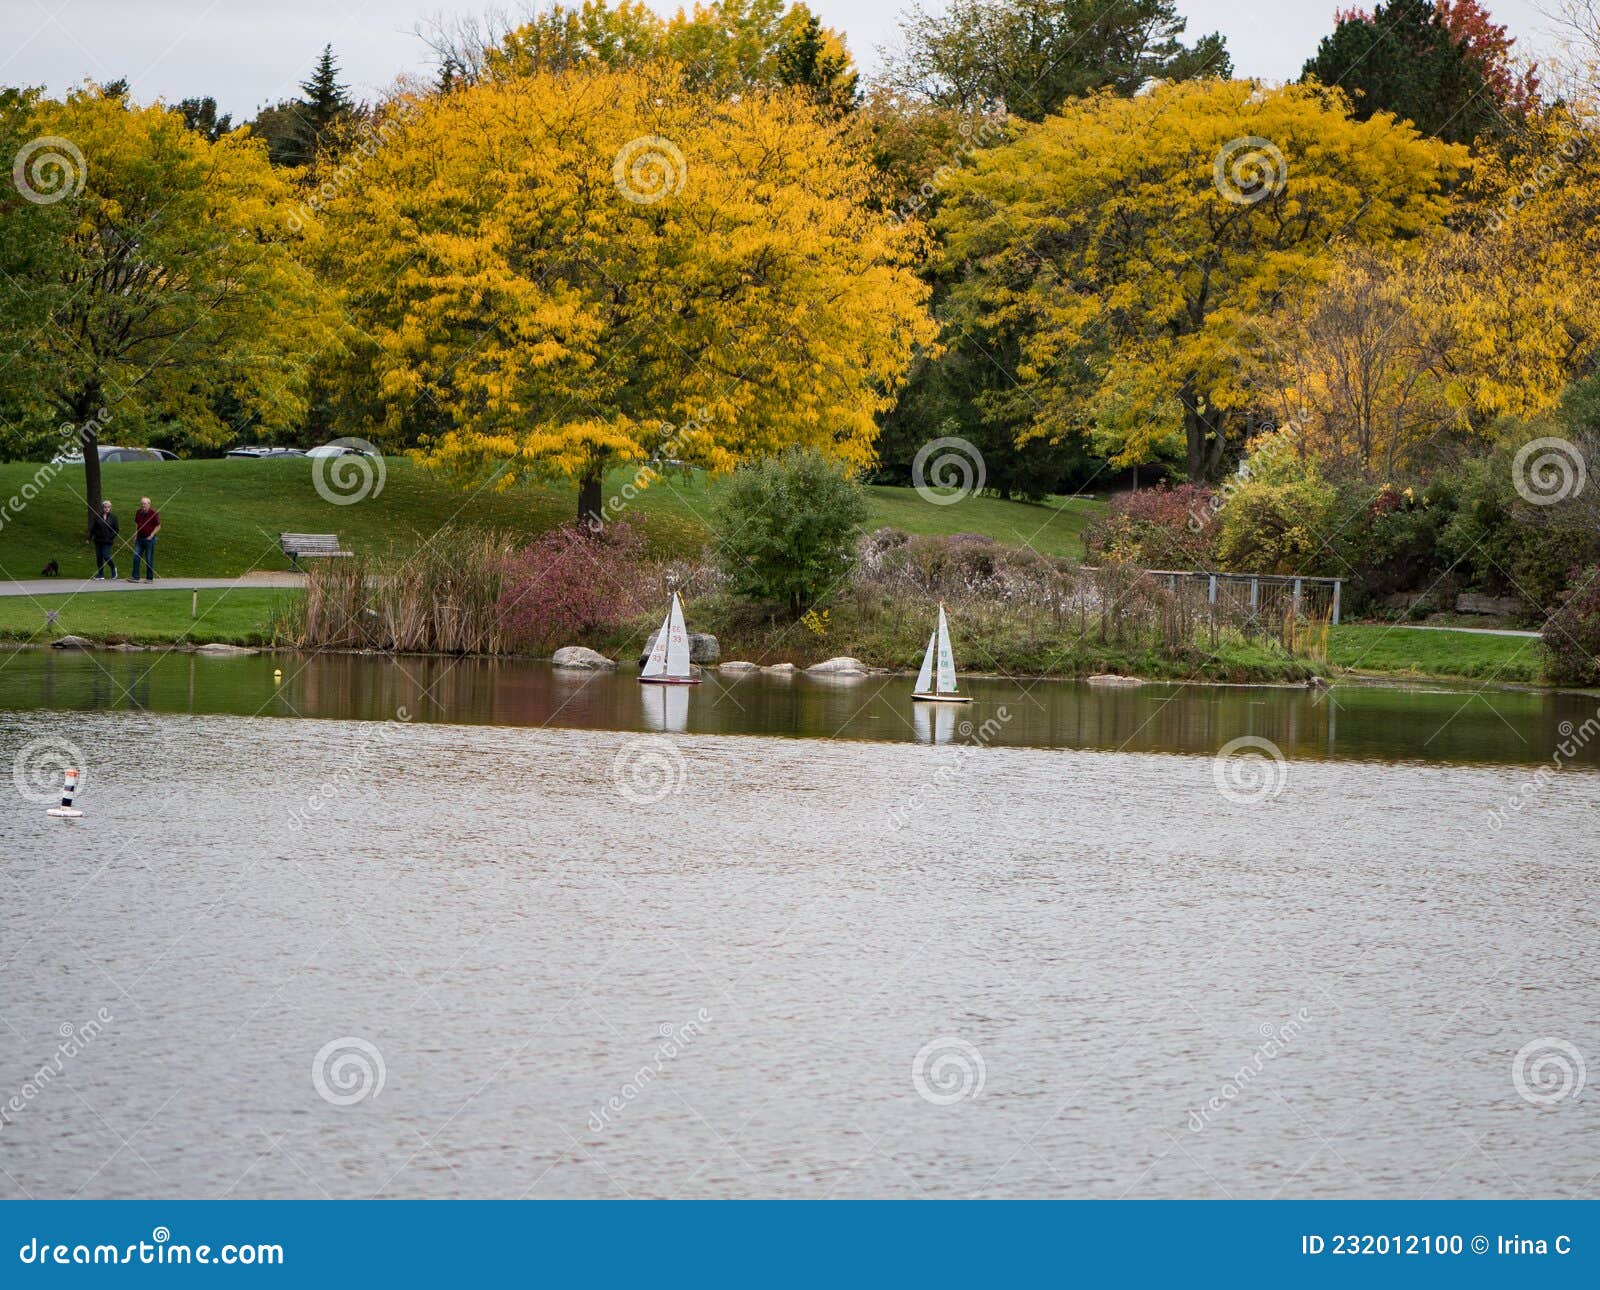 two small collectable yachts on a pond in a fall season